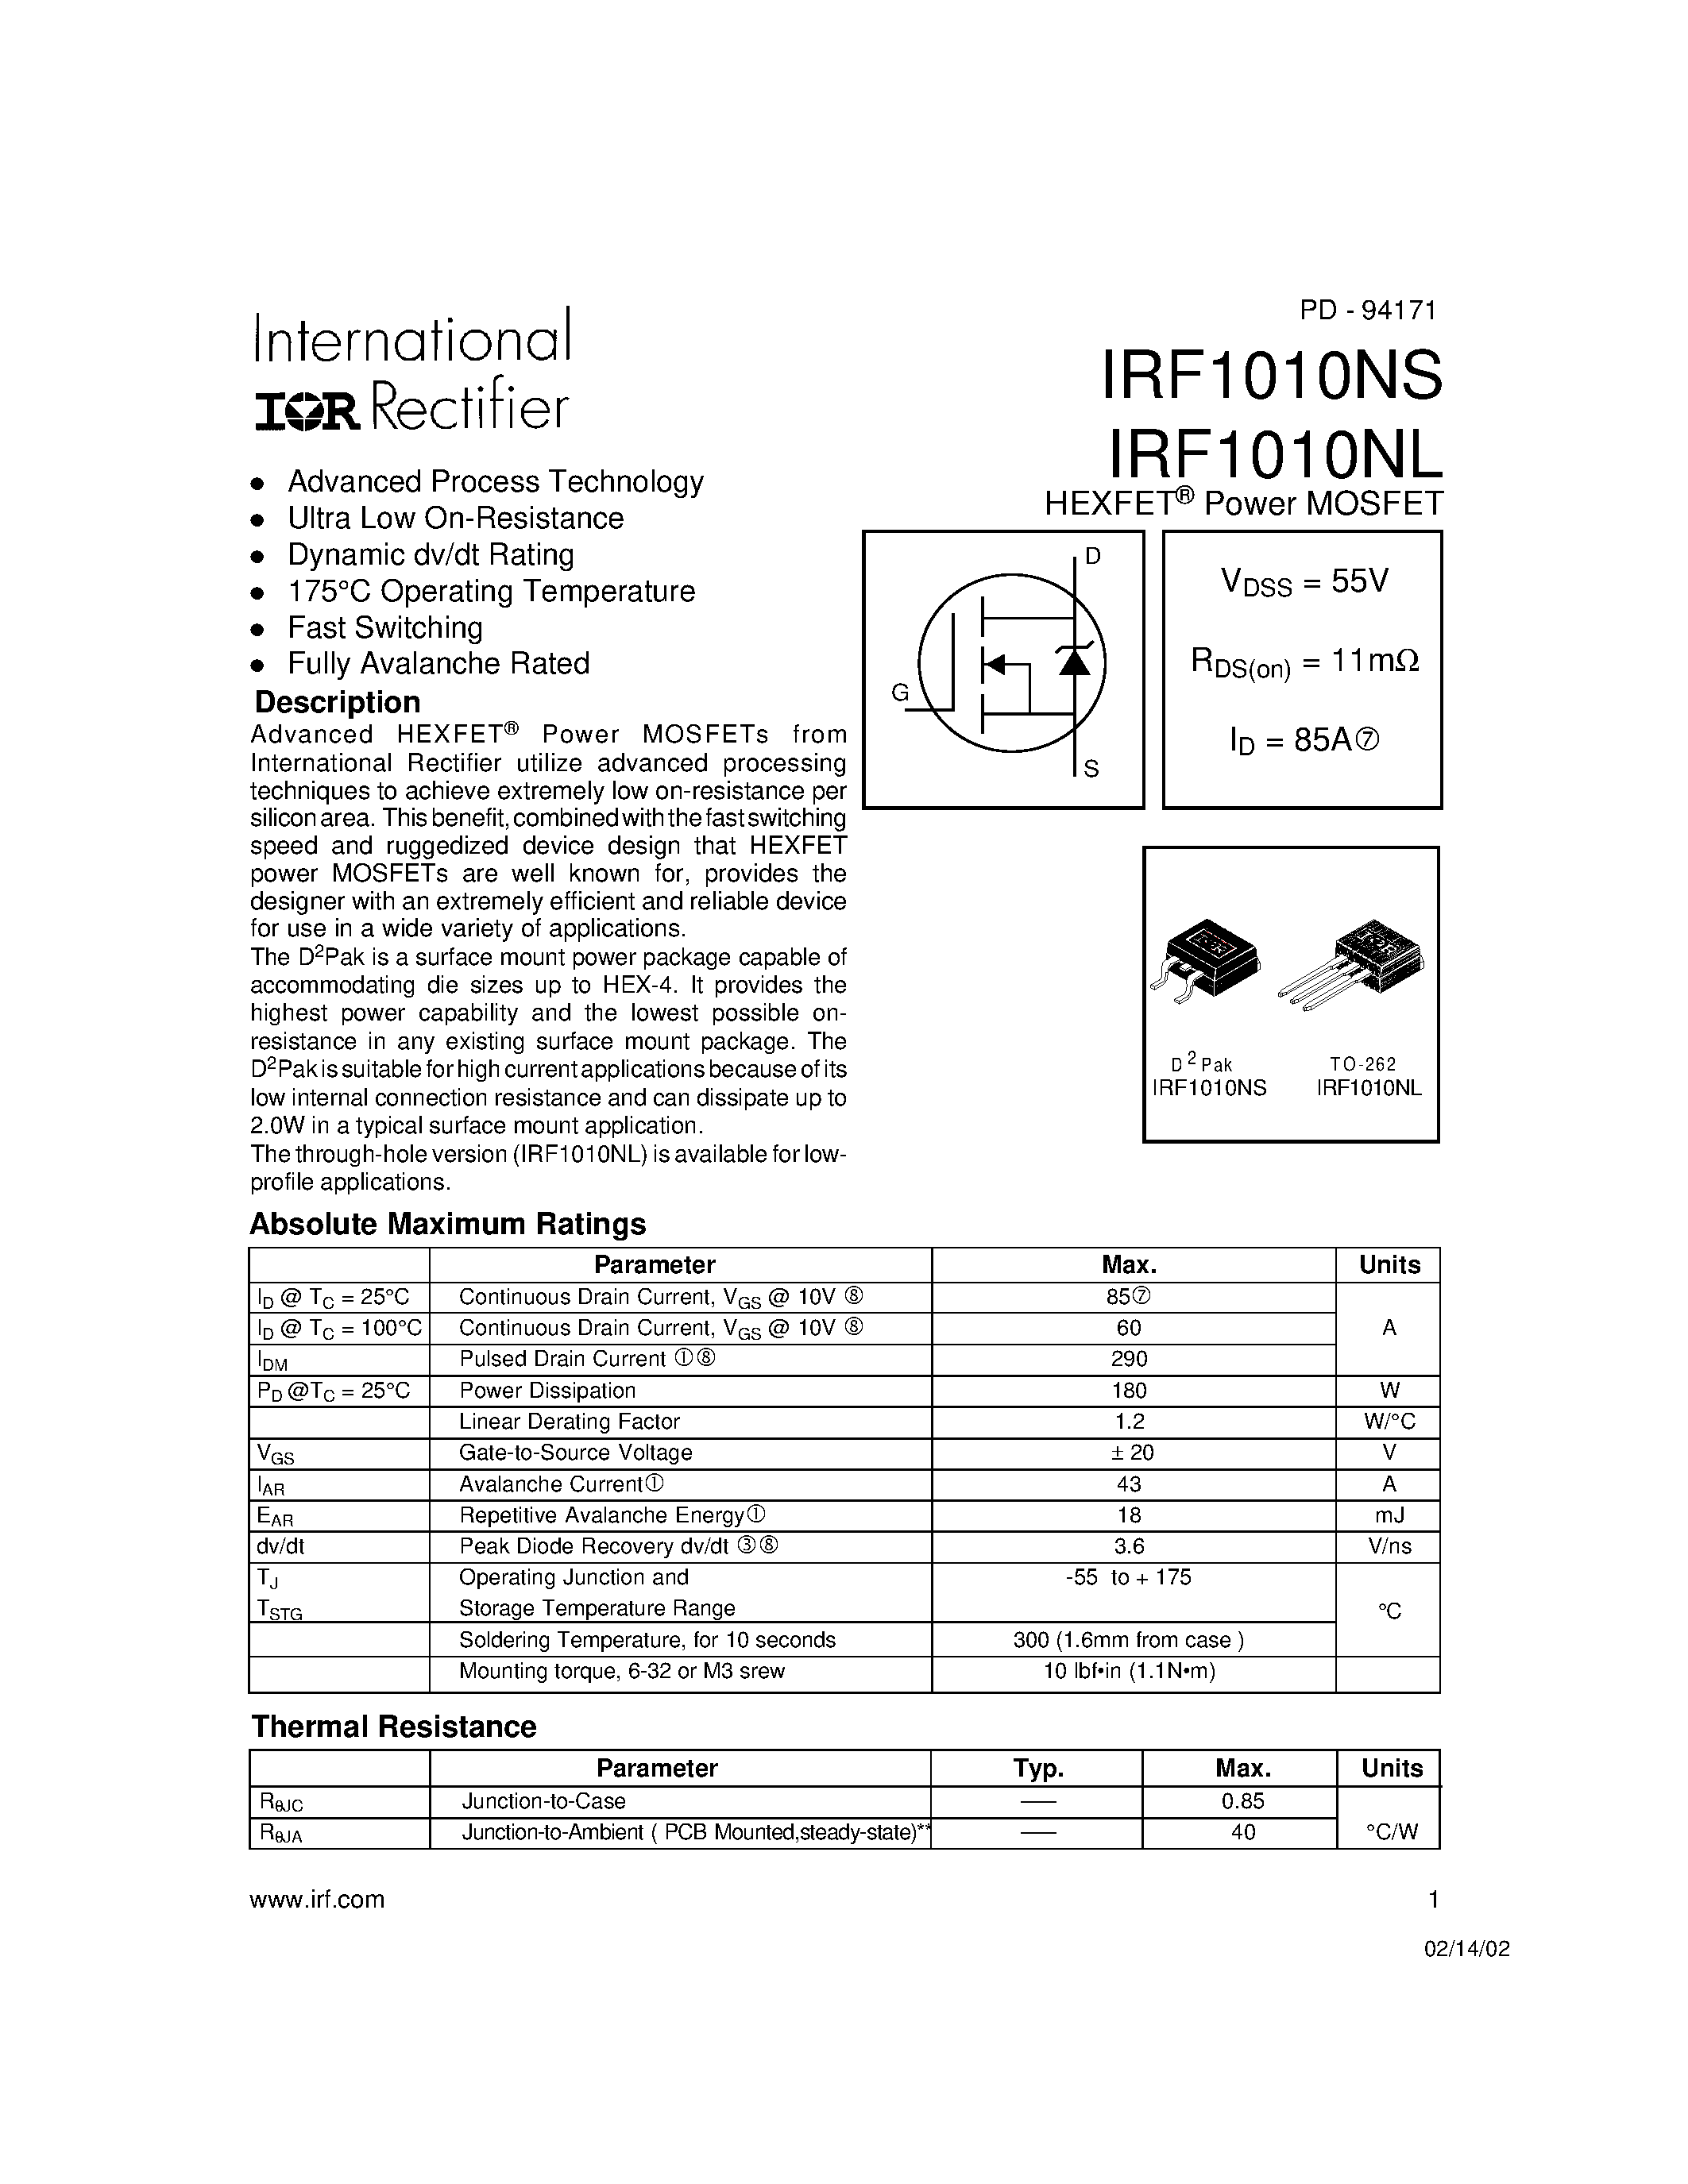 Даташит IRF1010NL - Power MOSFET(Vdss = 55 V/ Rds(on)=11mohm/ Id=85A) страница 1